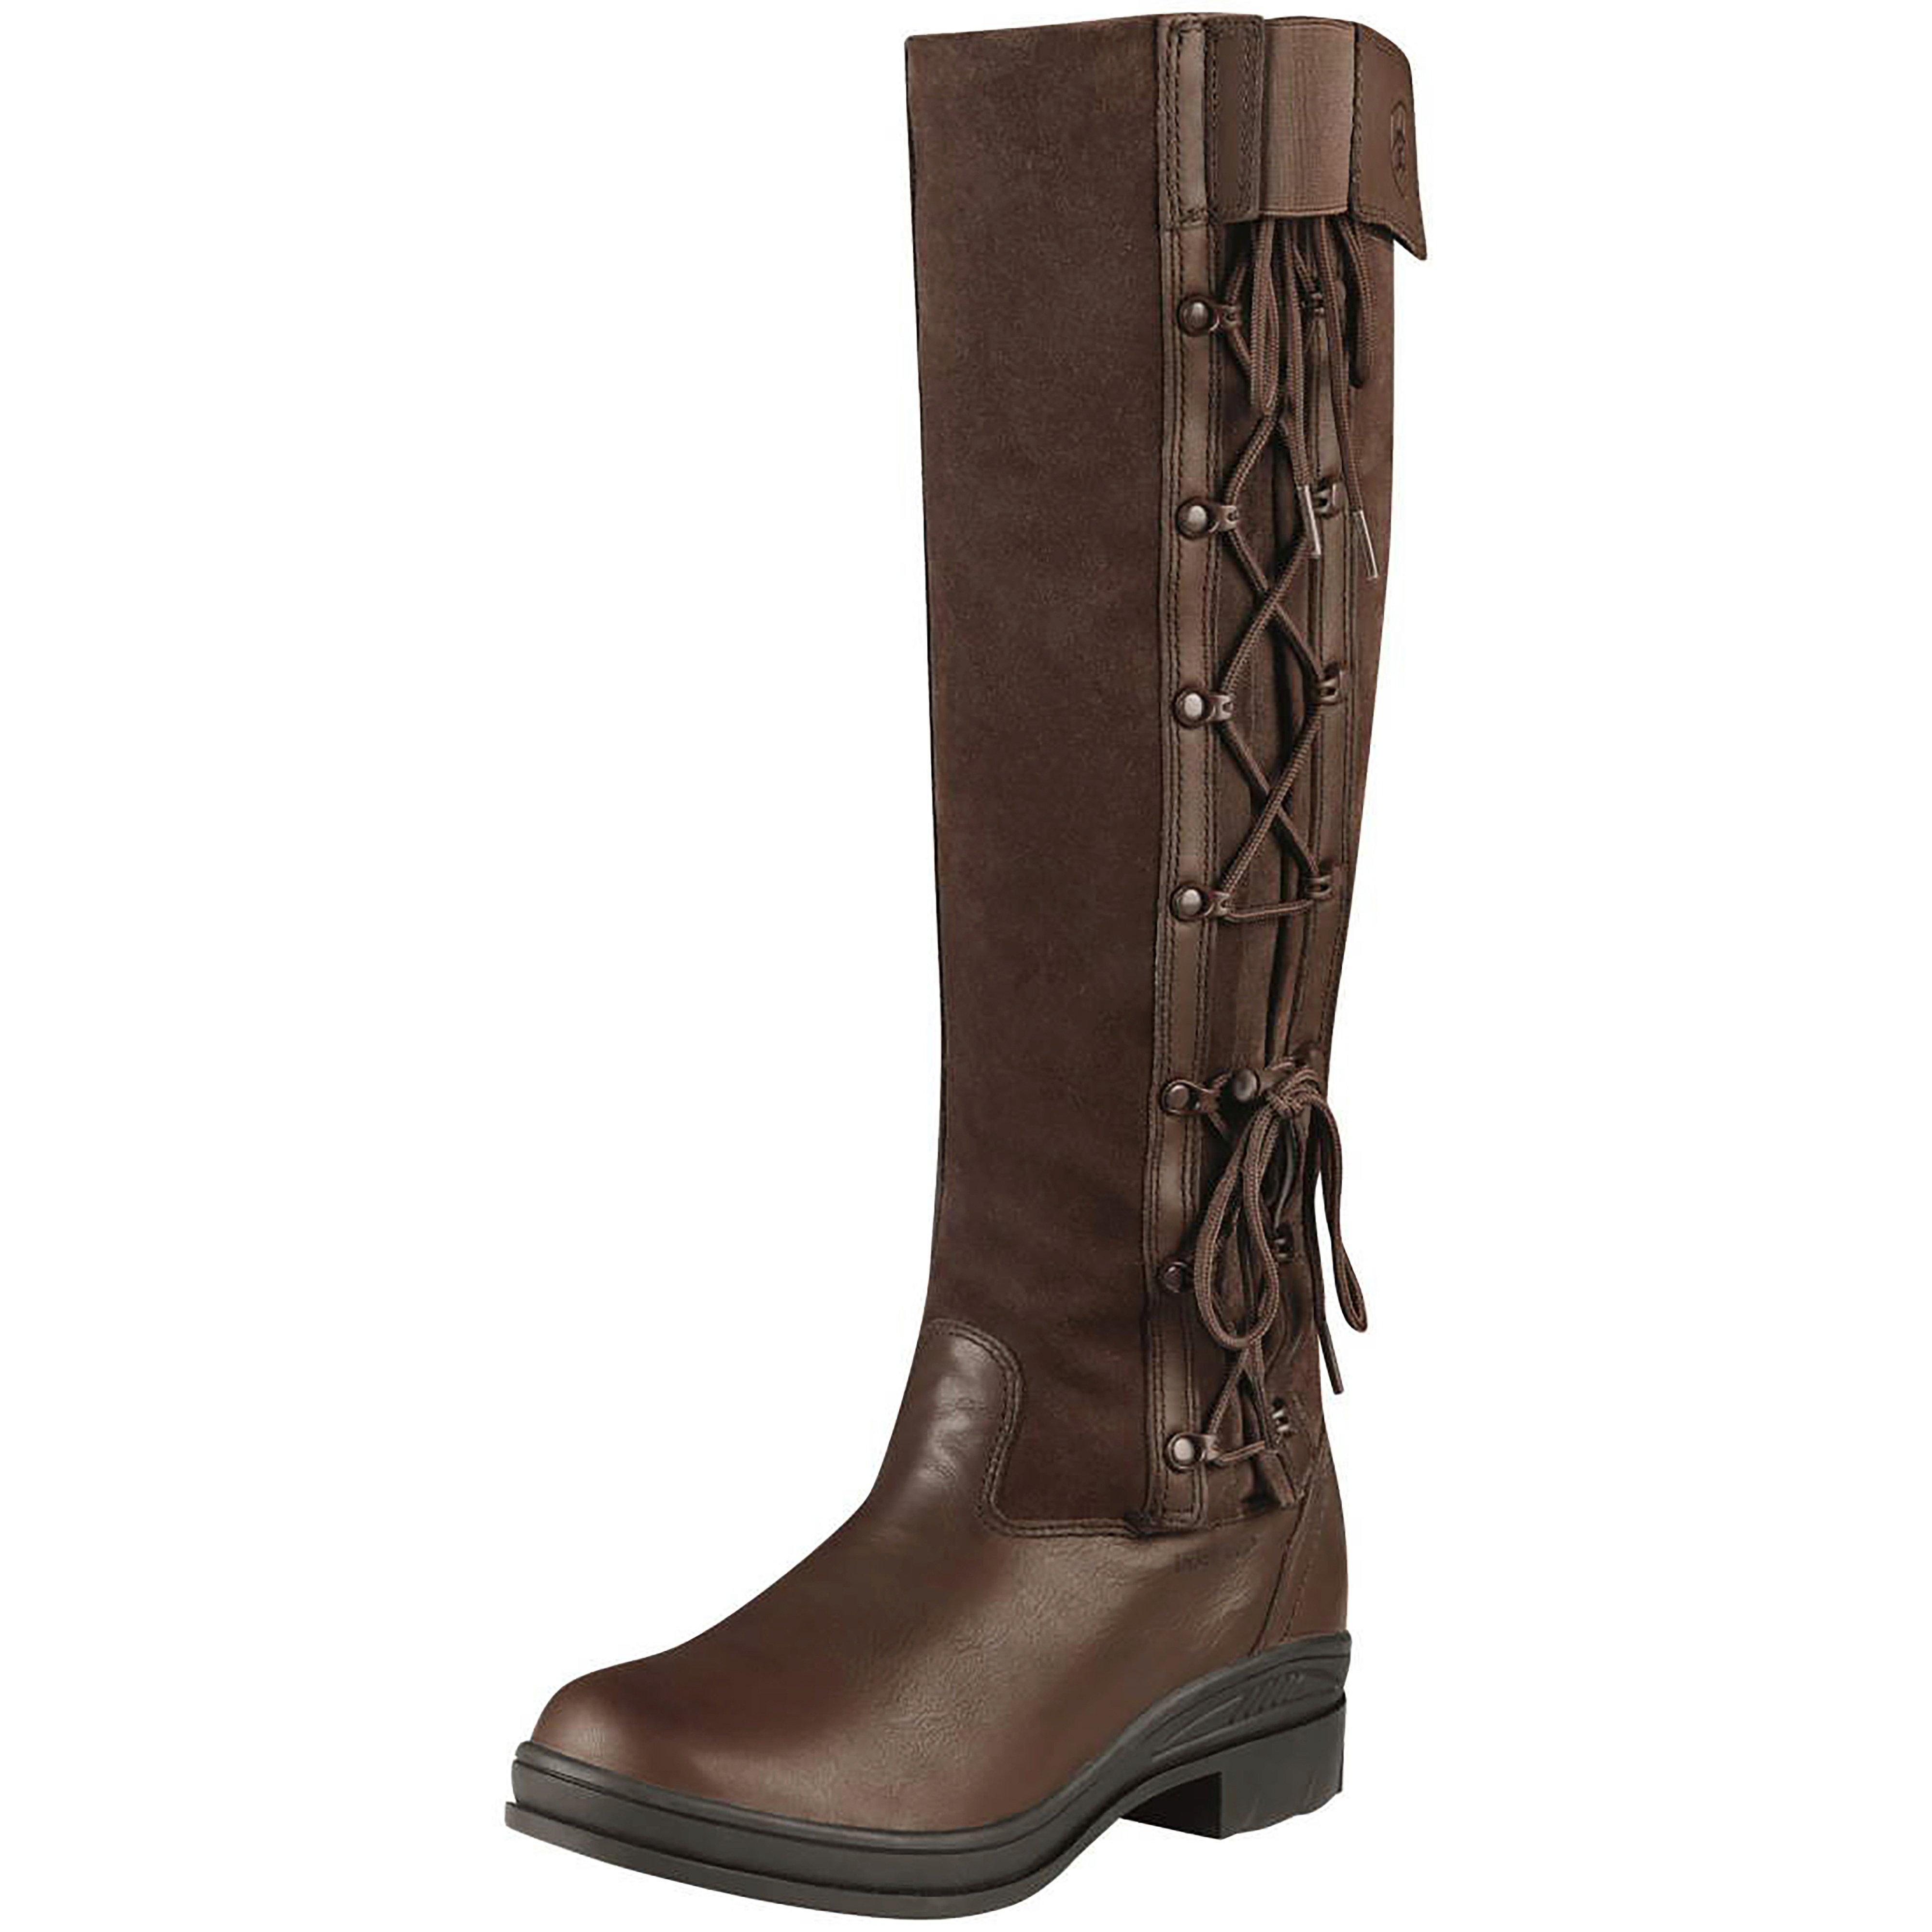 Womens Grasmere H2O Country Boots Chocolate